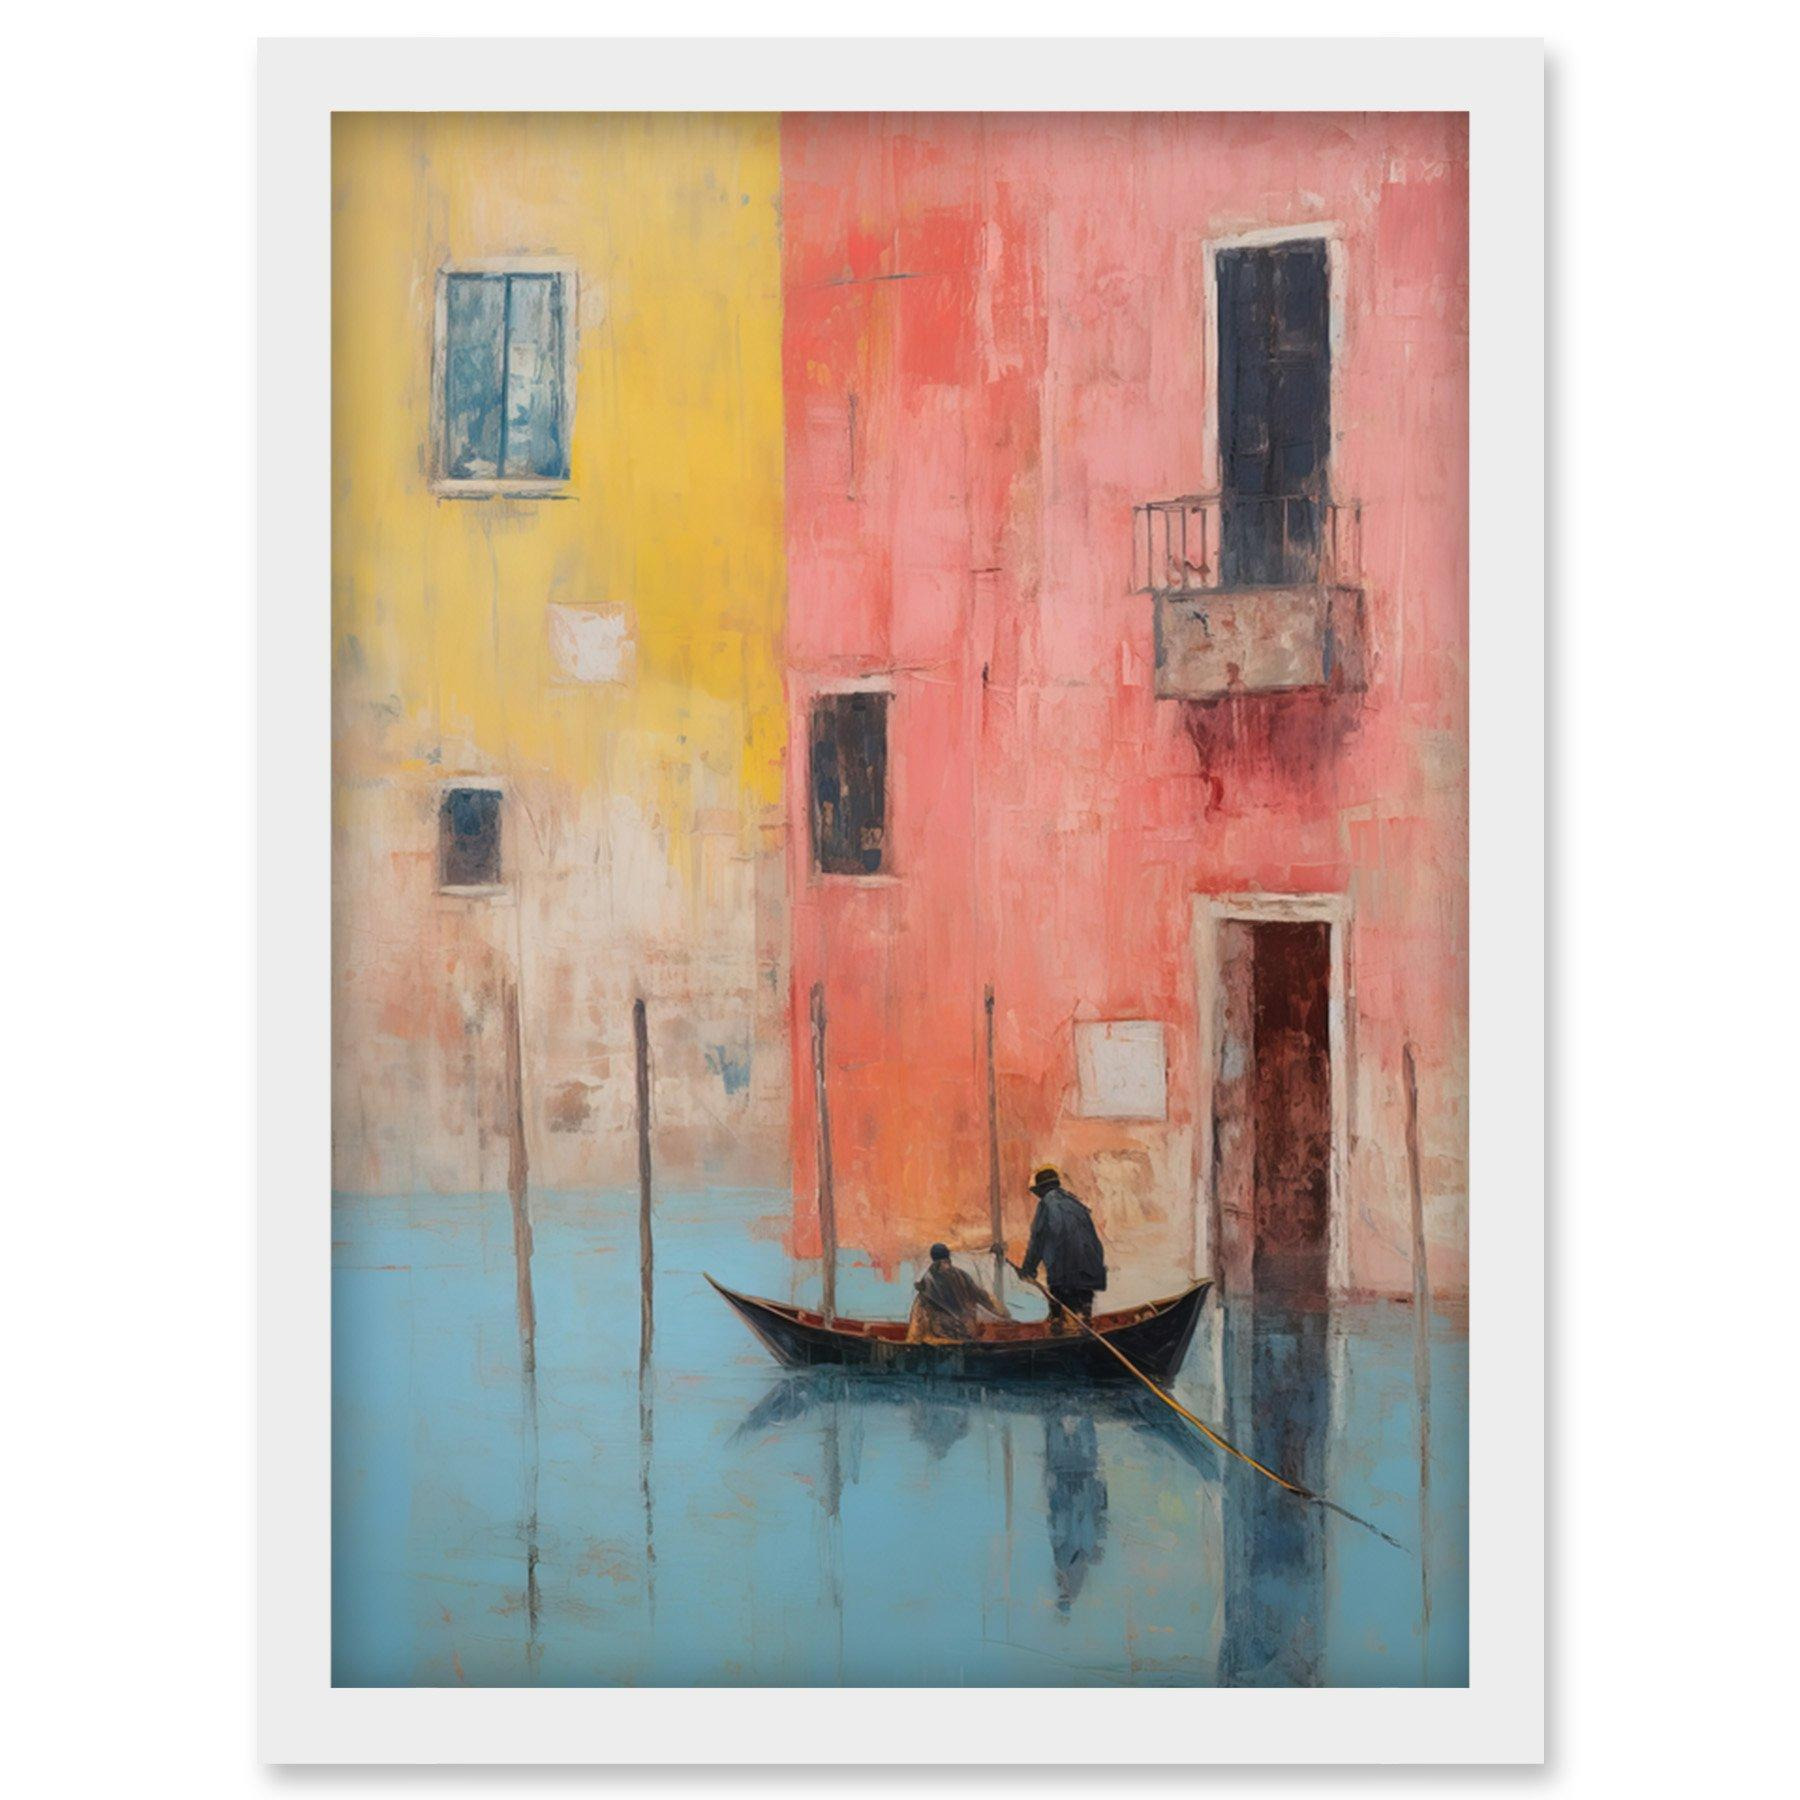 Venice Canal Gondola Ride Oil Painting Blue Pink Yellow Pastel Colour Rower Boat on River Artwork Framed Wall Art Print A4 - image 1